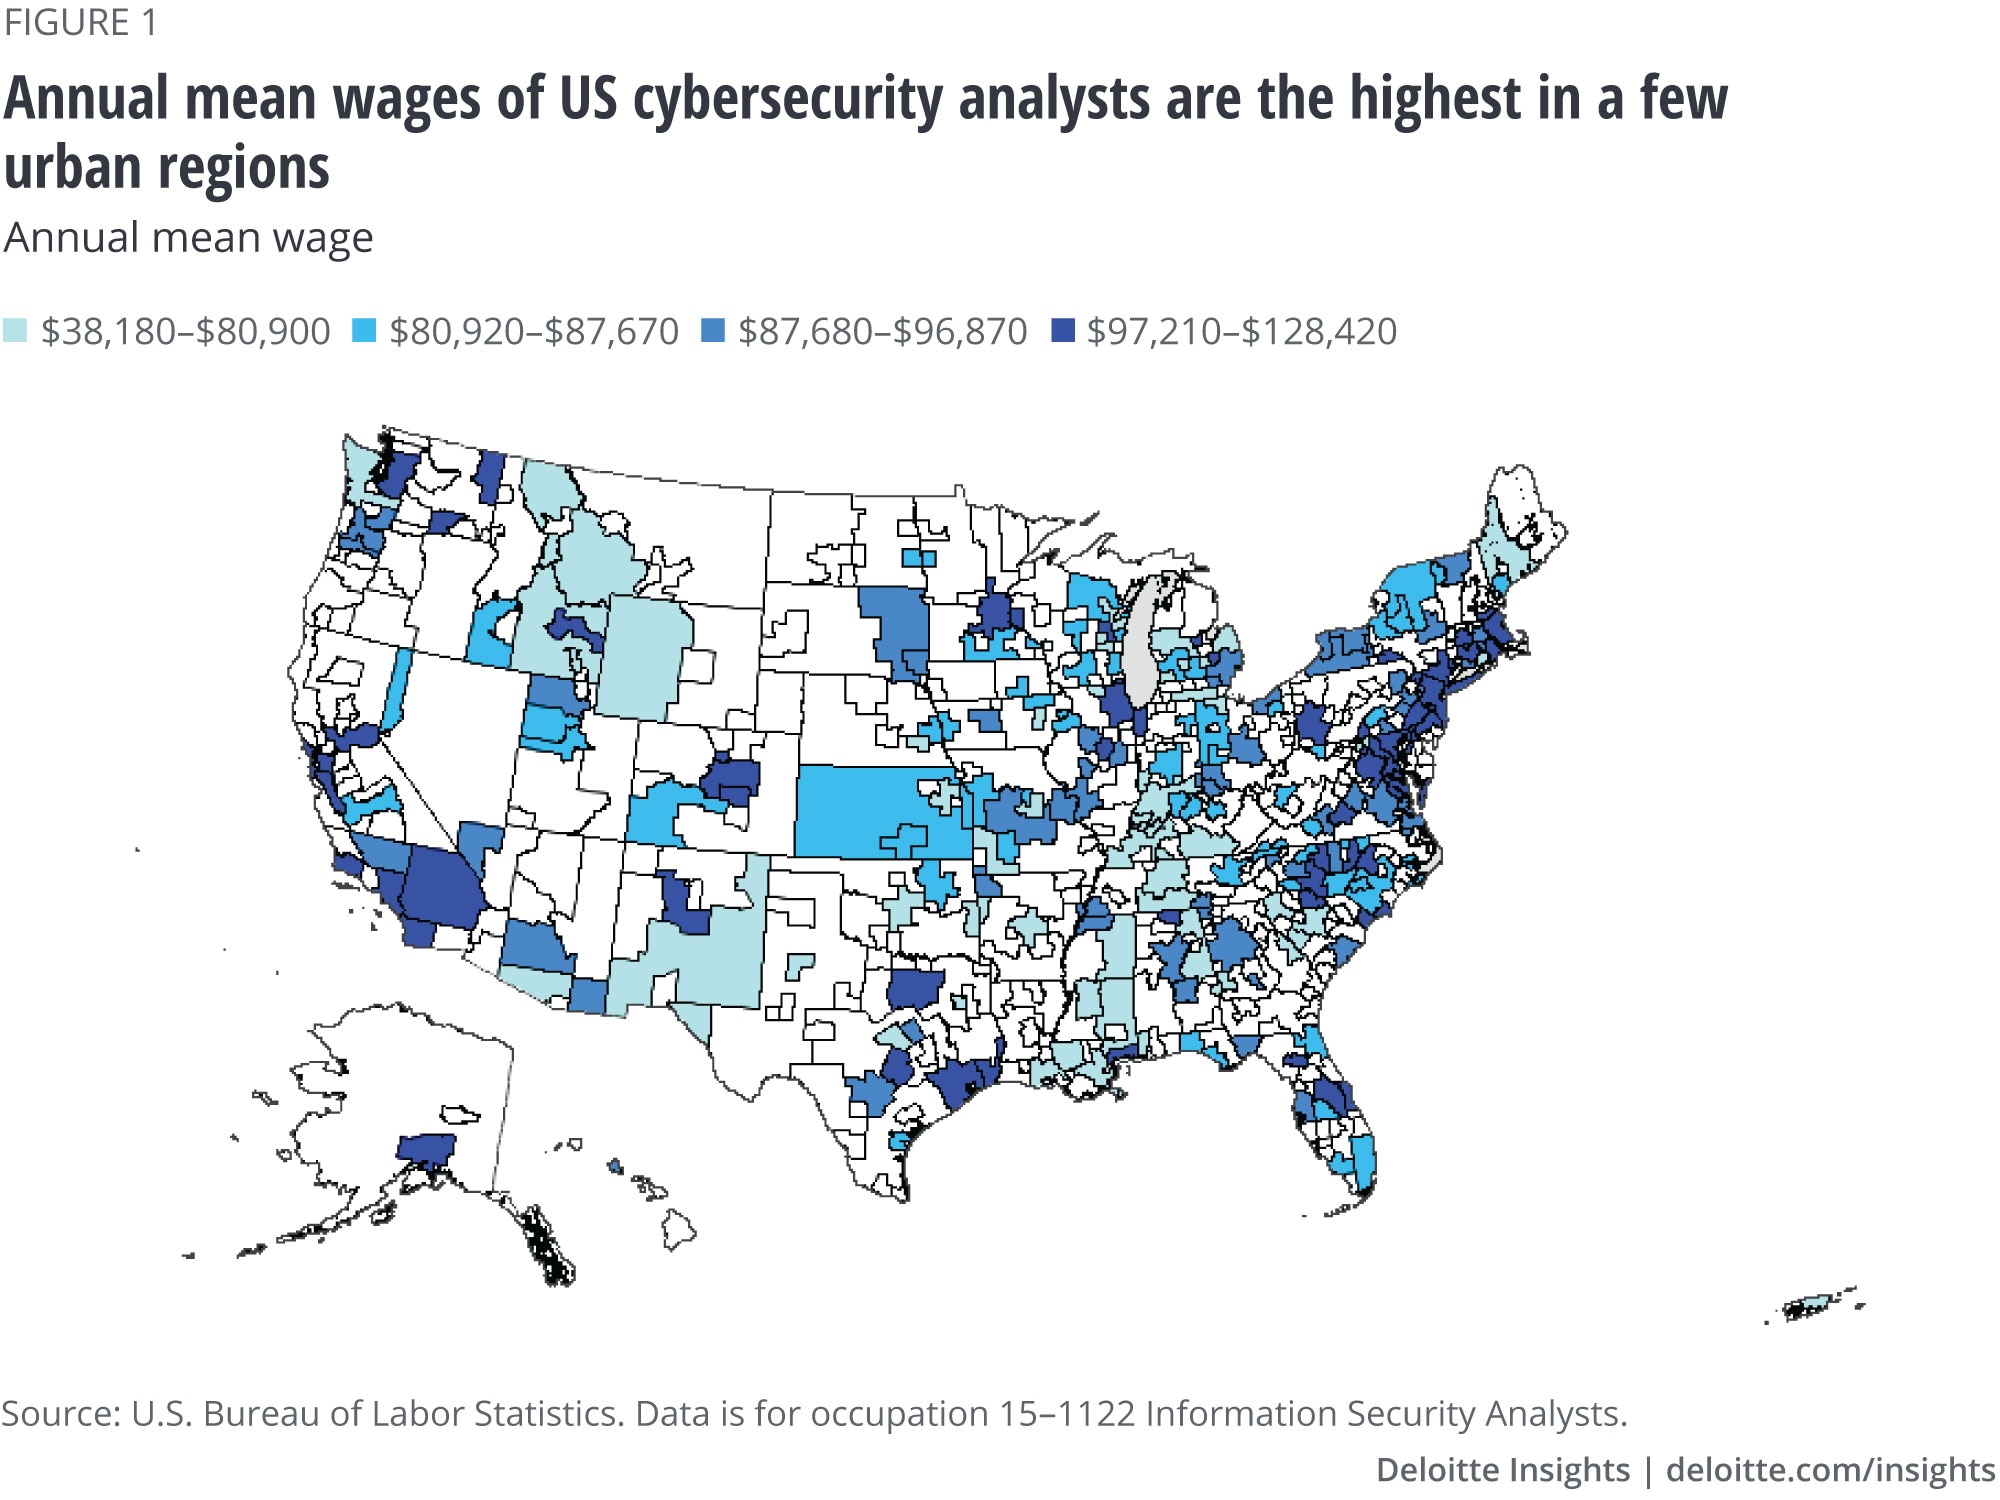 Annual mean wages of US cybersecurity analysts are the highest in a few urban regions